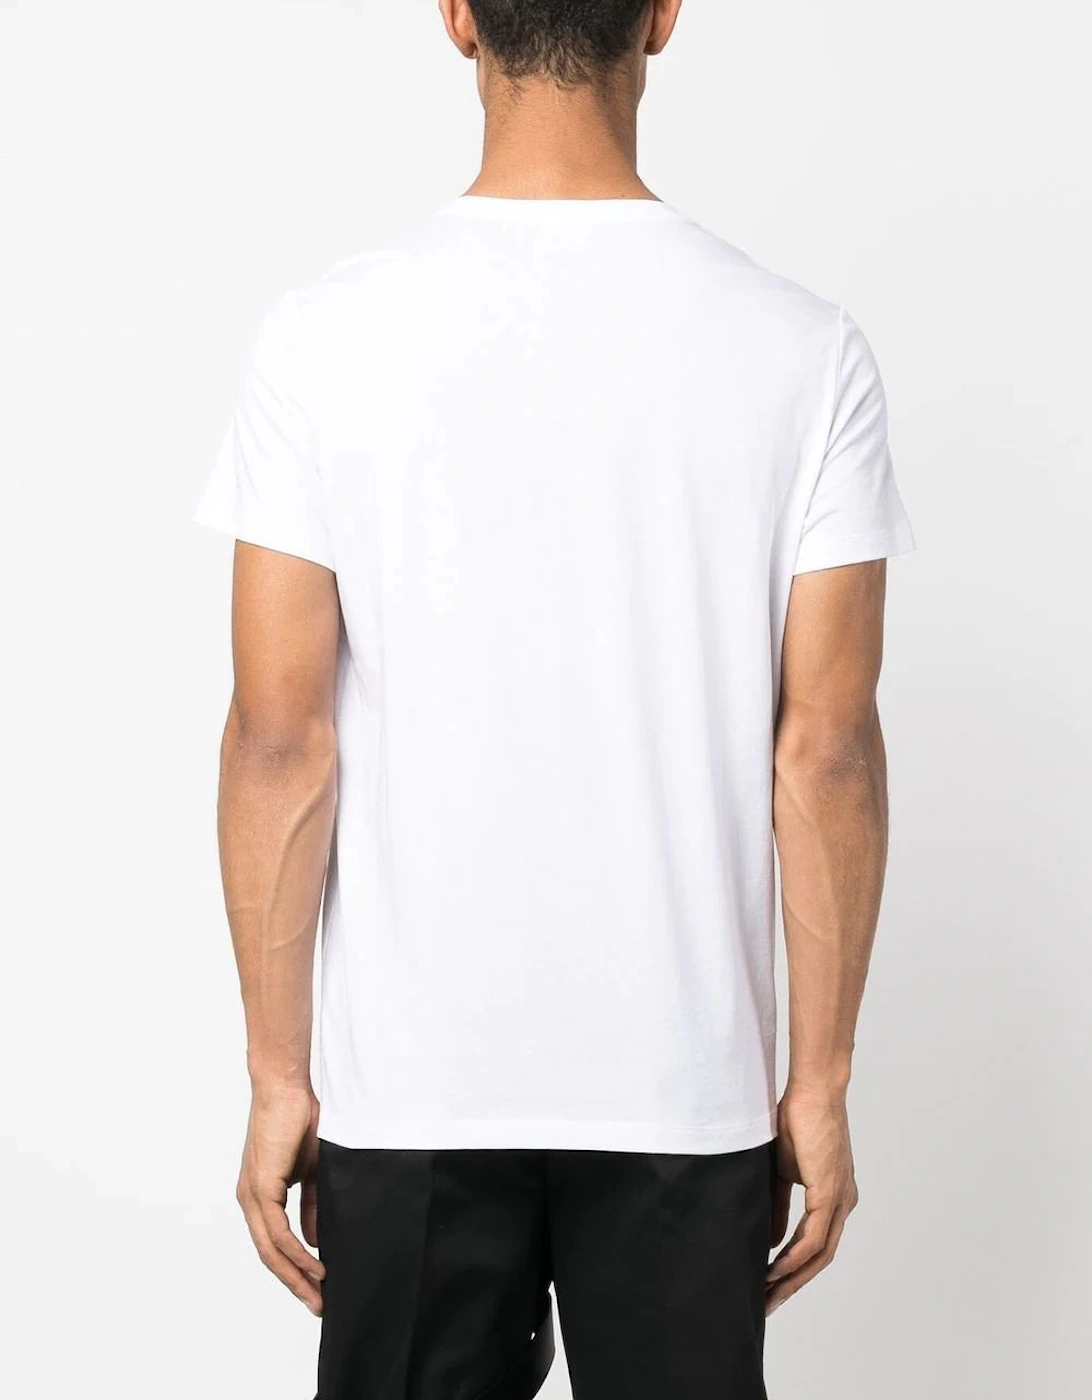 Silver Print T-Shirt in White